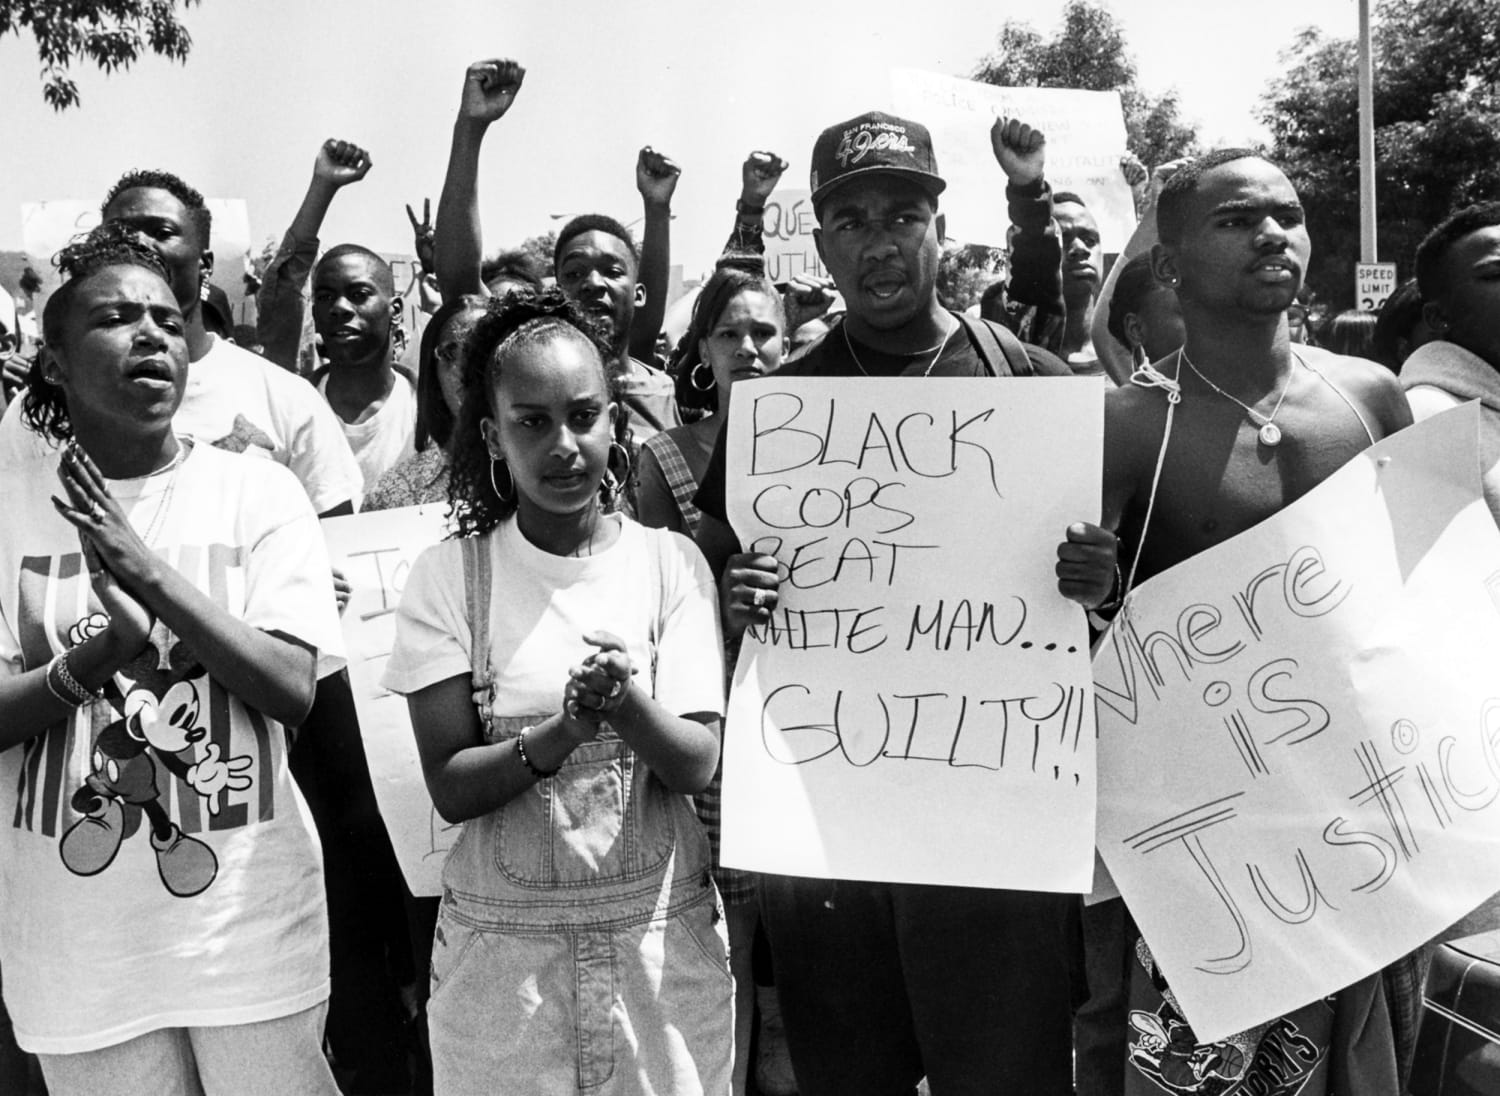 Echoes of the L.A. riots still felt among local Black community 30 years later